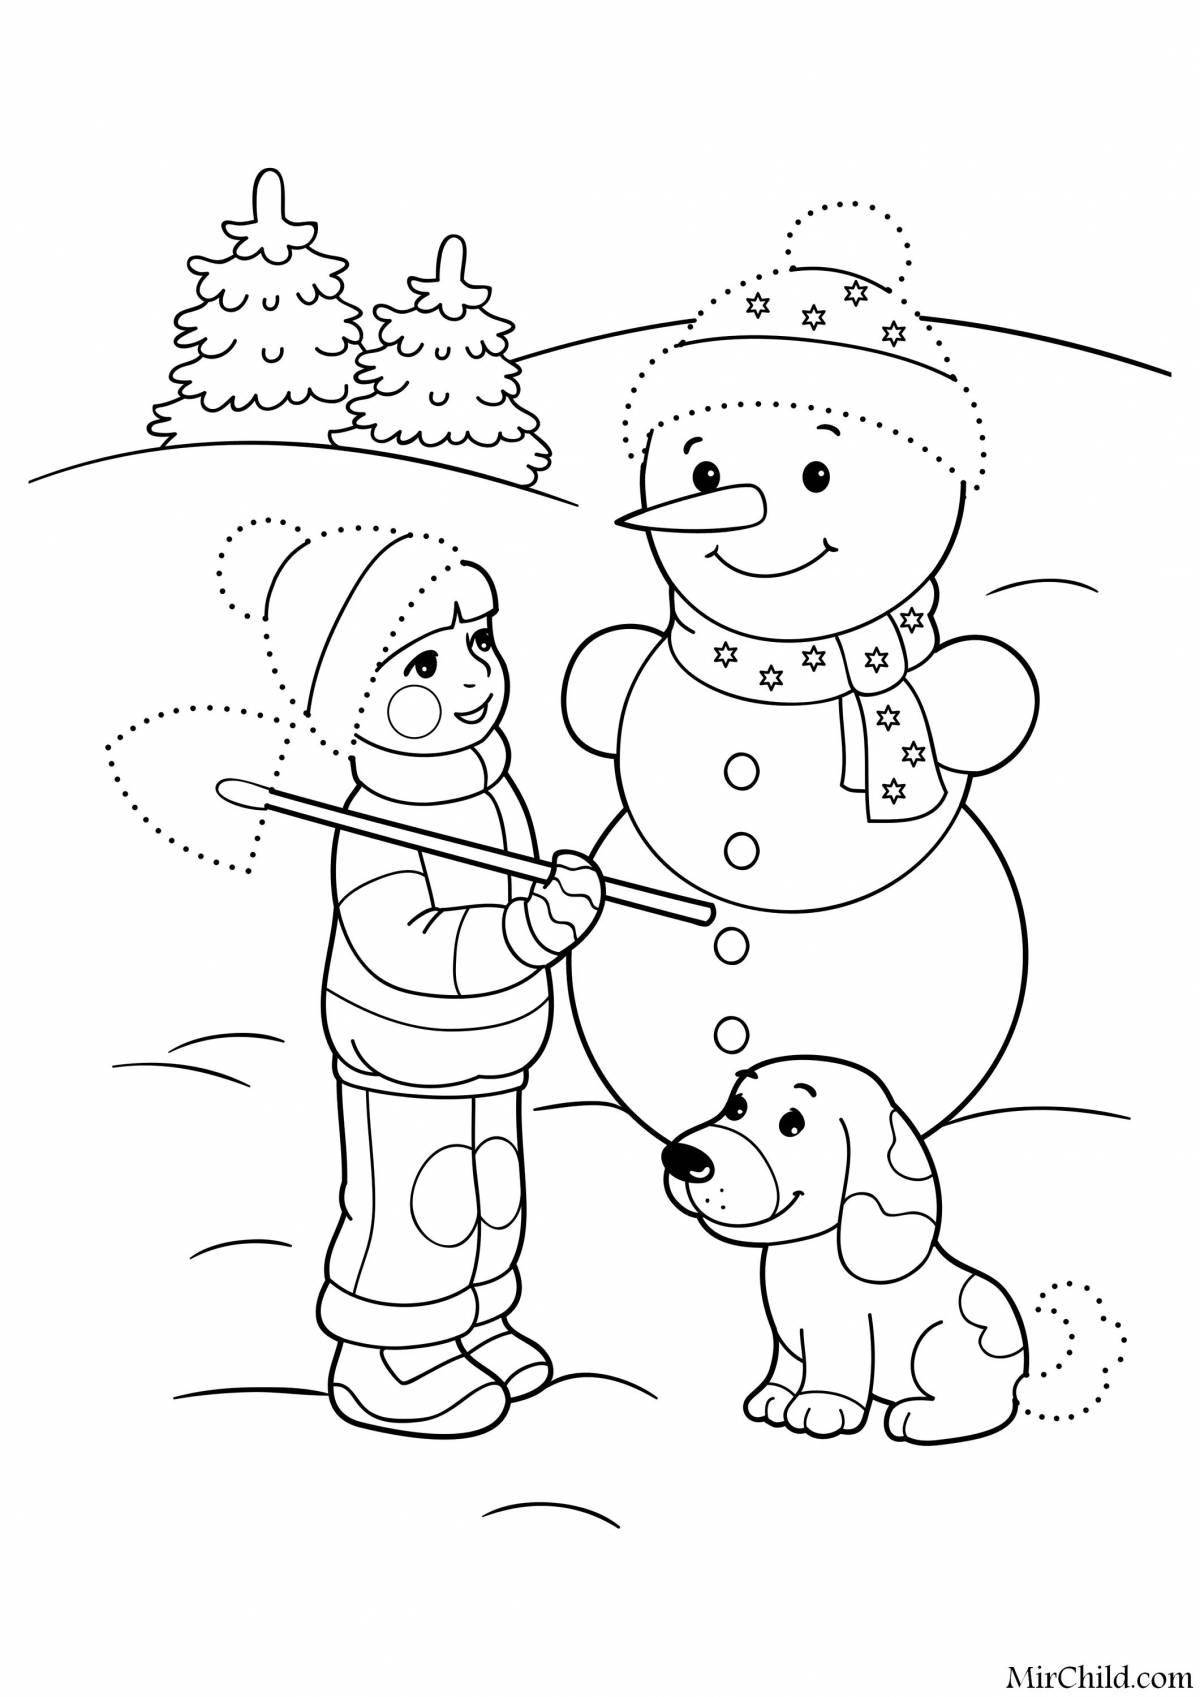 Great 5 year old winter coloring book